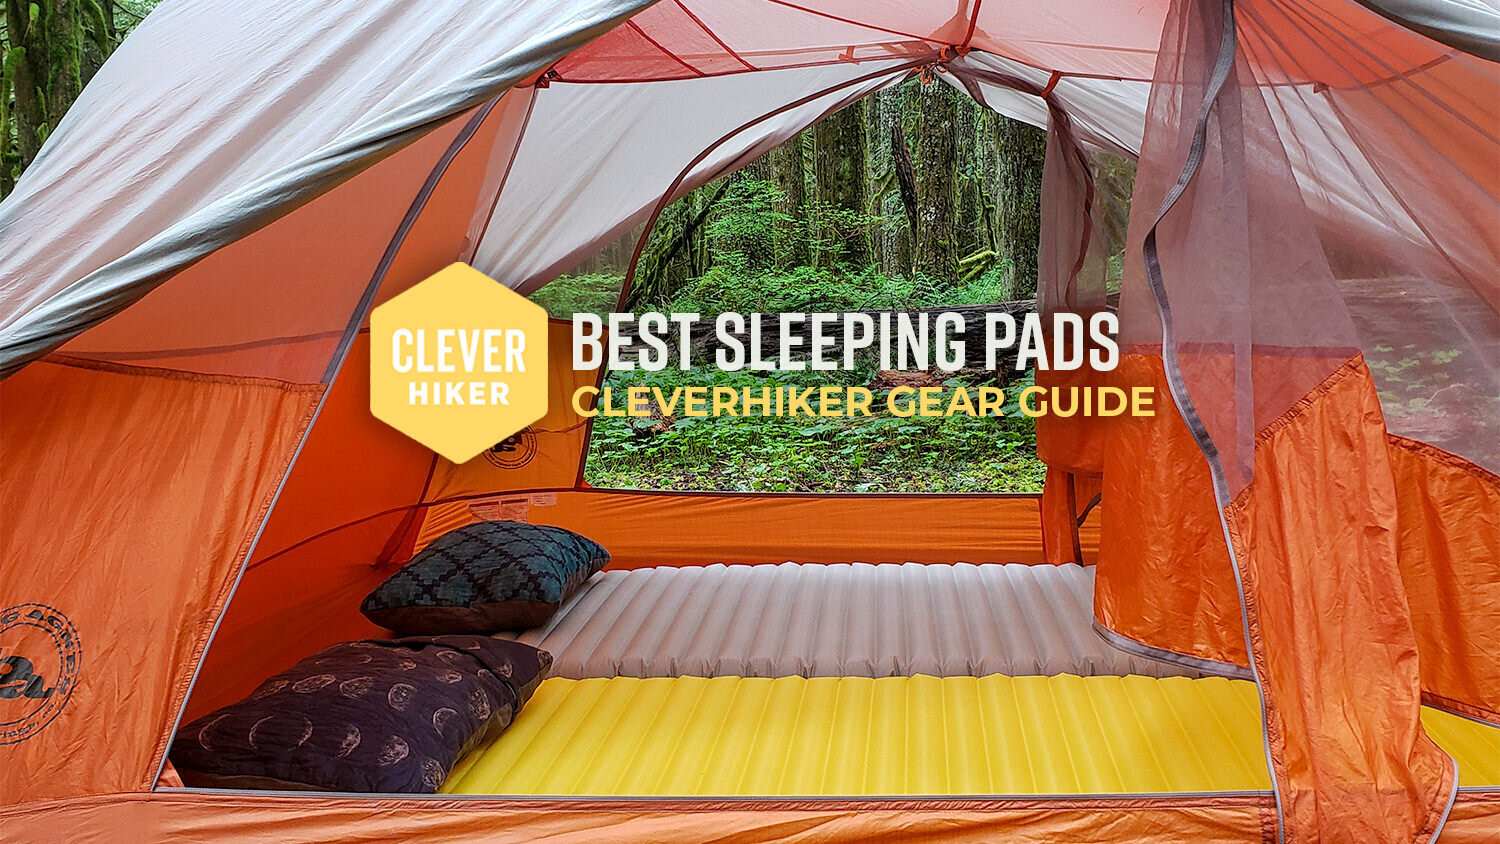 The Ultimate Guide to Campsite Comfort: Make Your Site Cozy.